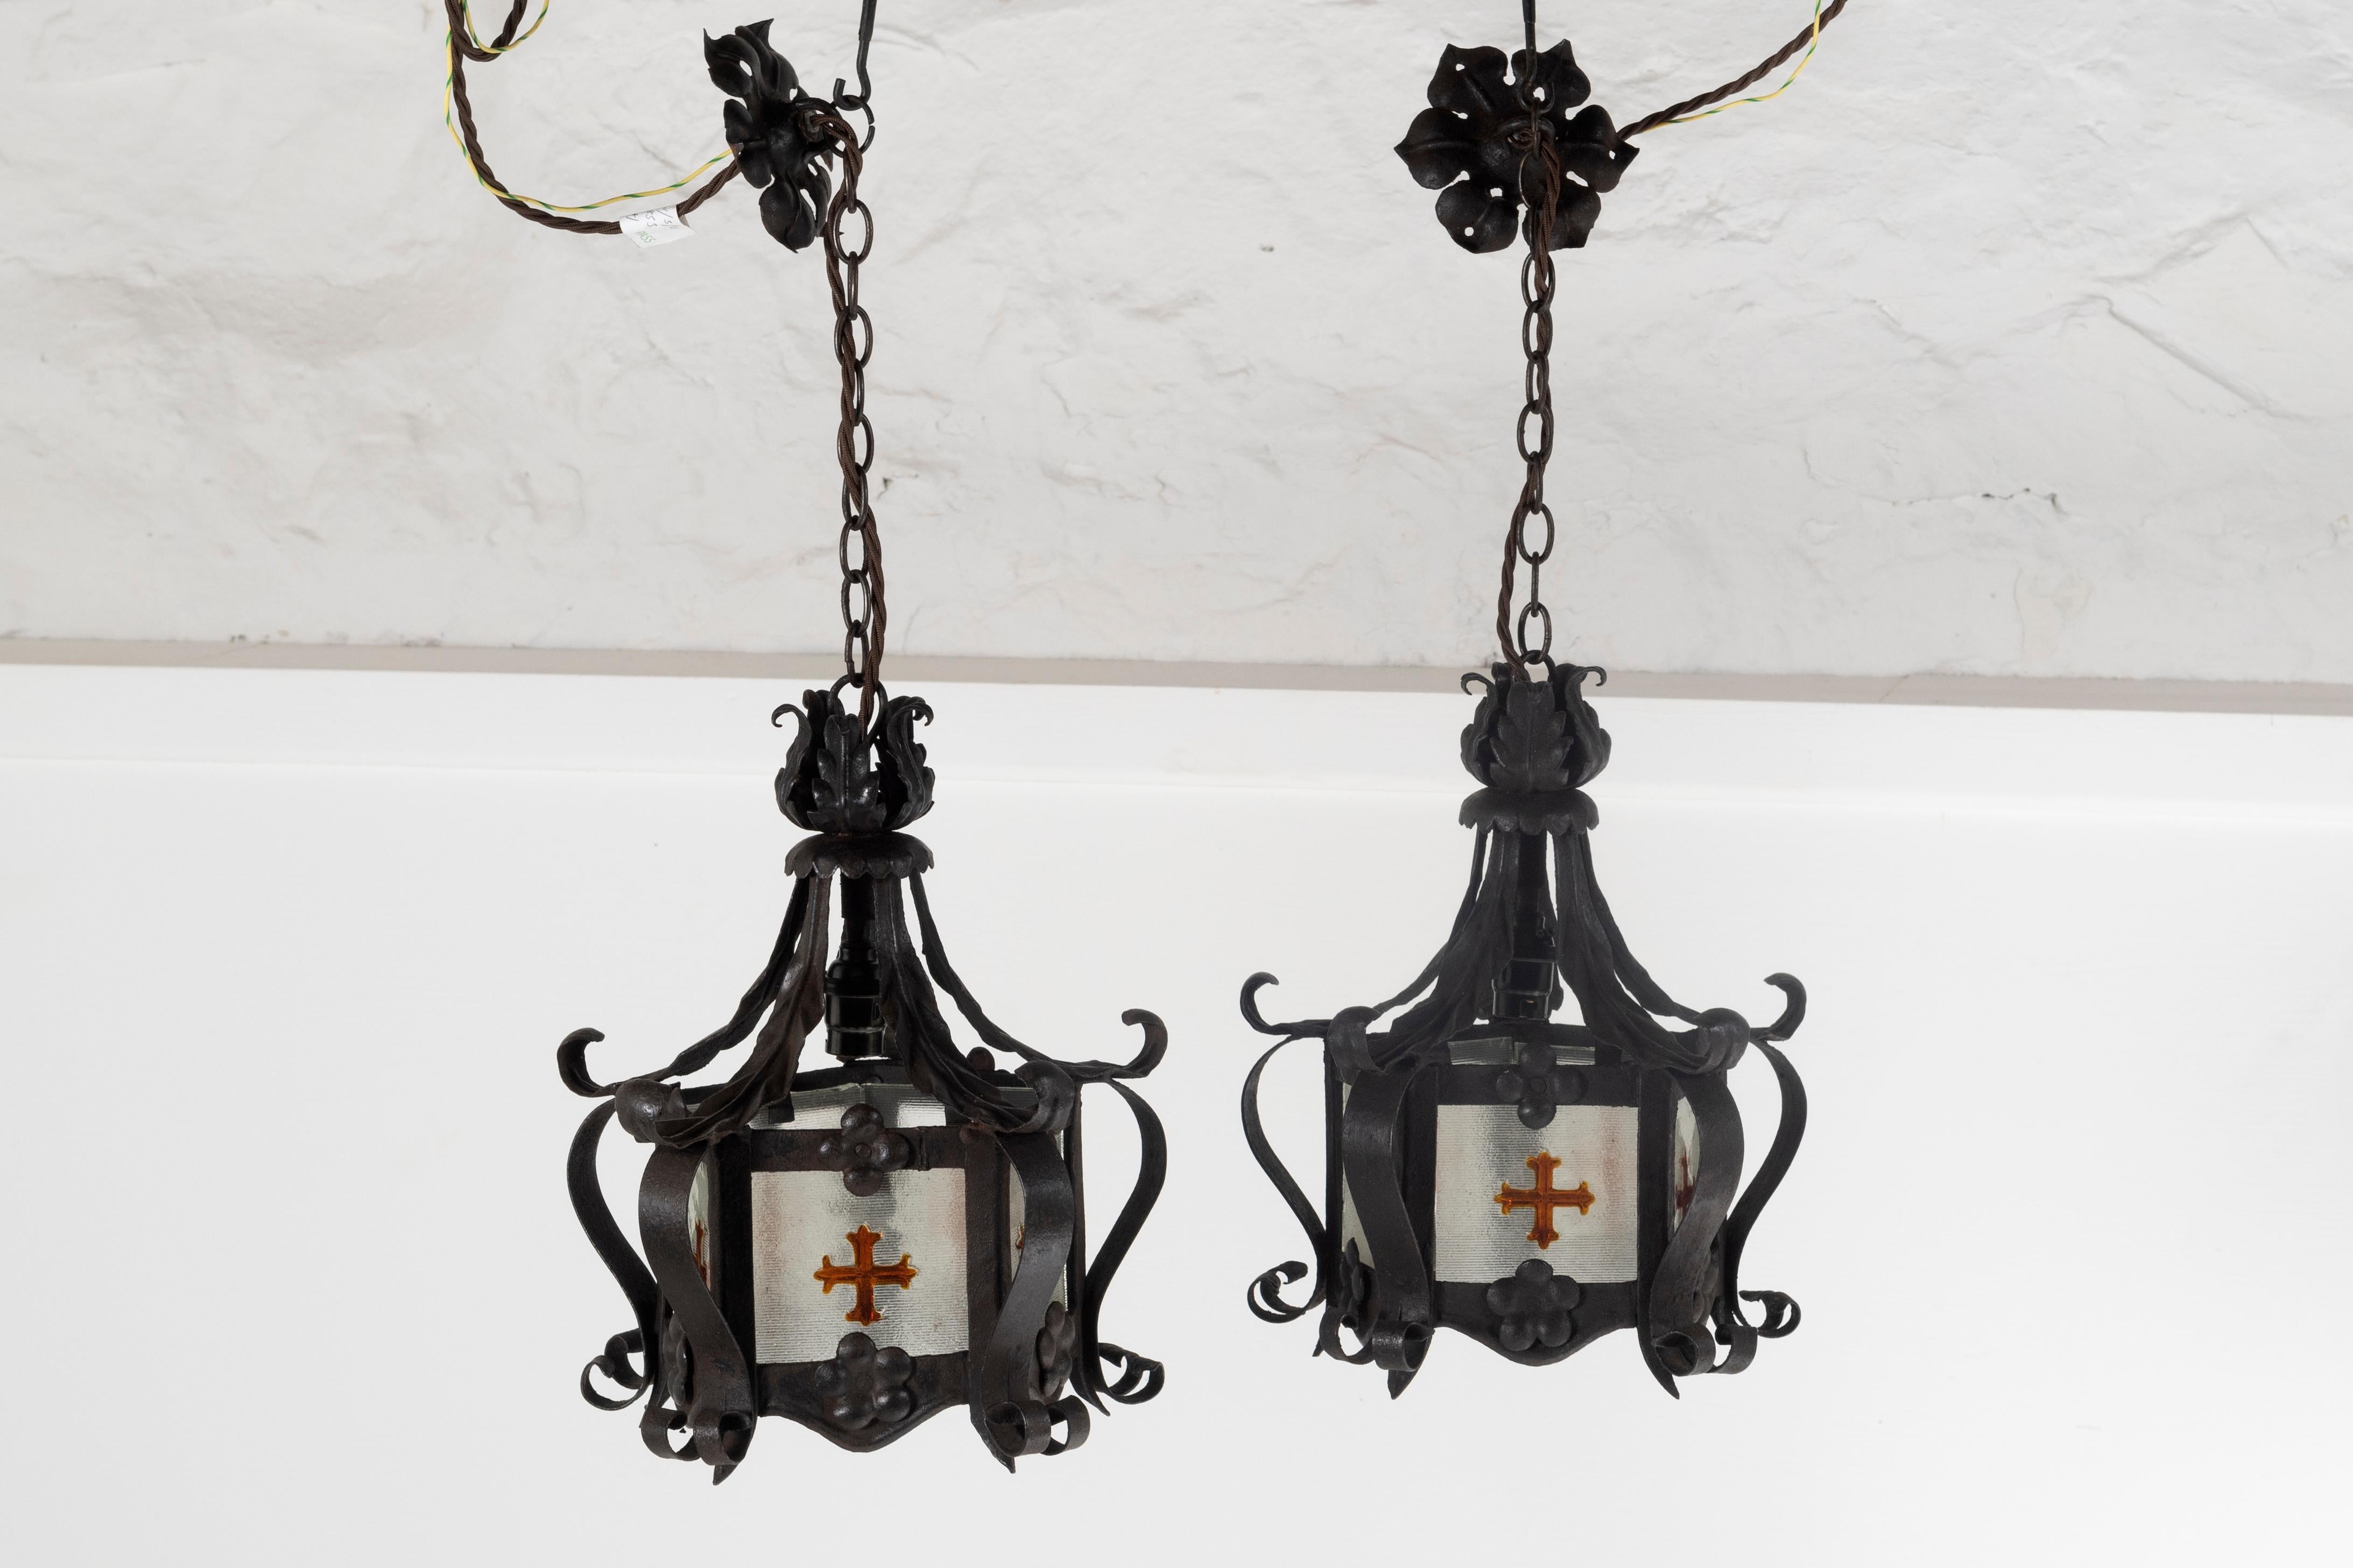 A wonderful pair of 19th century aesthetic Hall Lanterns with floral decorative motifs, foliage and scrollwork. Featuring five glazed stained glass panels which date to 1860.
A matching pair with great from and superb patina, both retain their